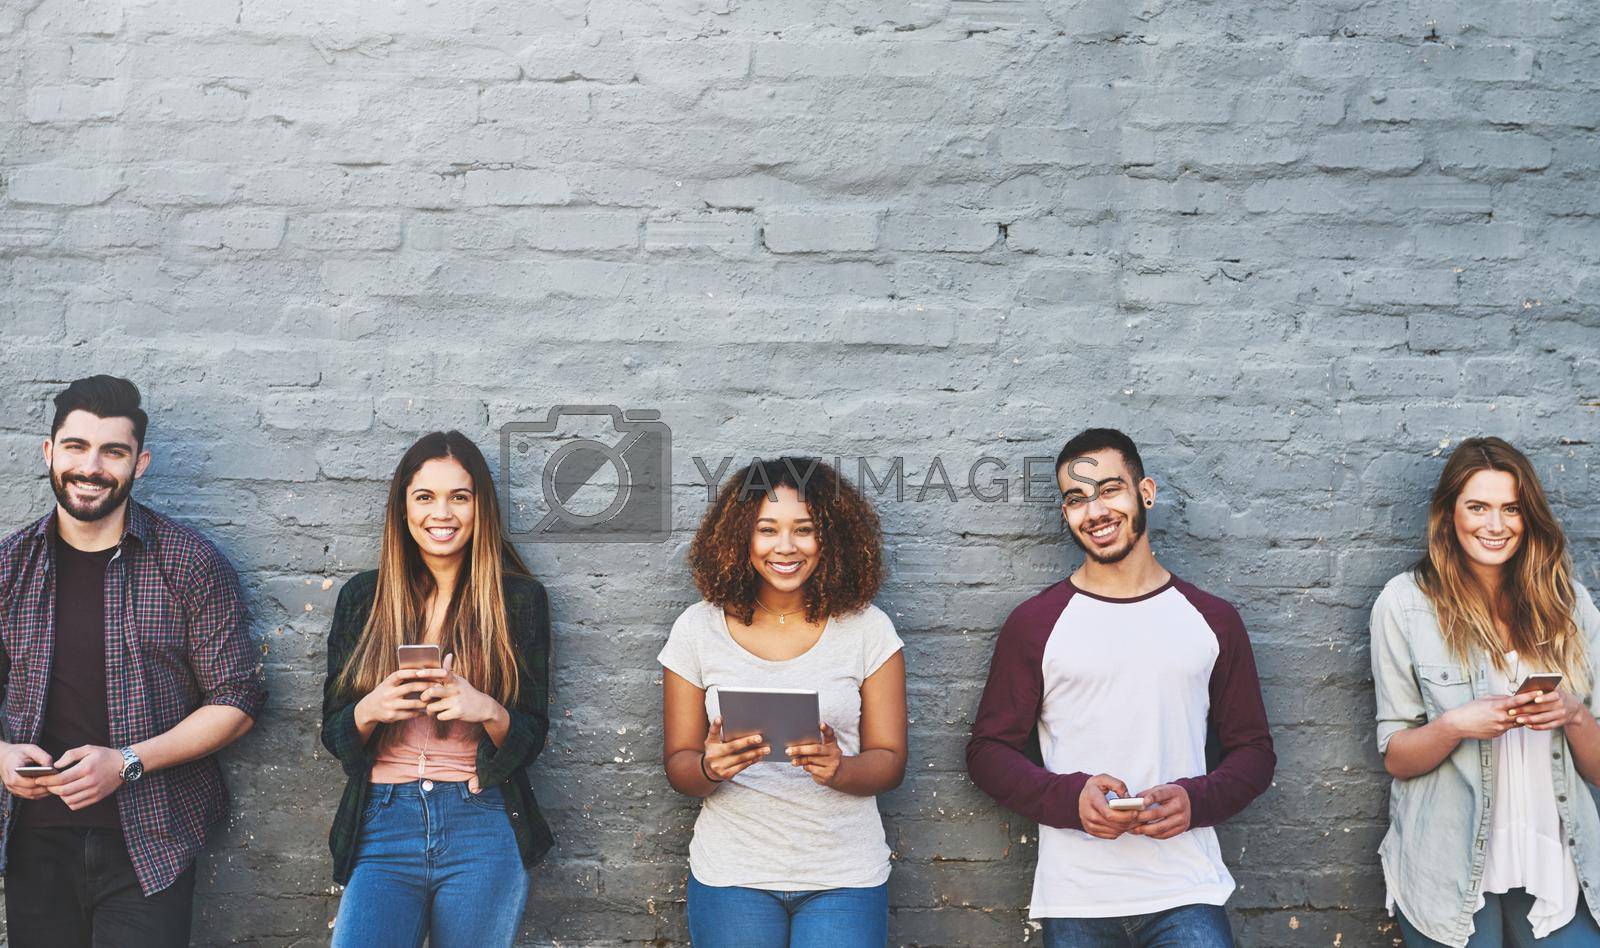 Portrait of a group of young people using their wireless devices together outdoors.